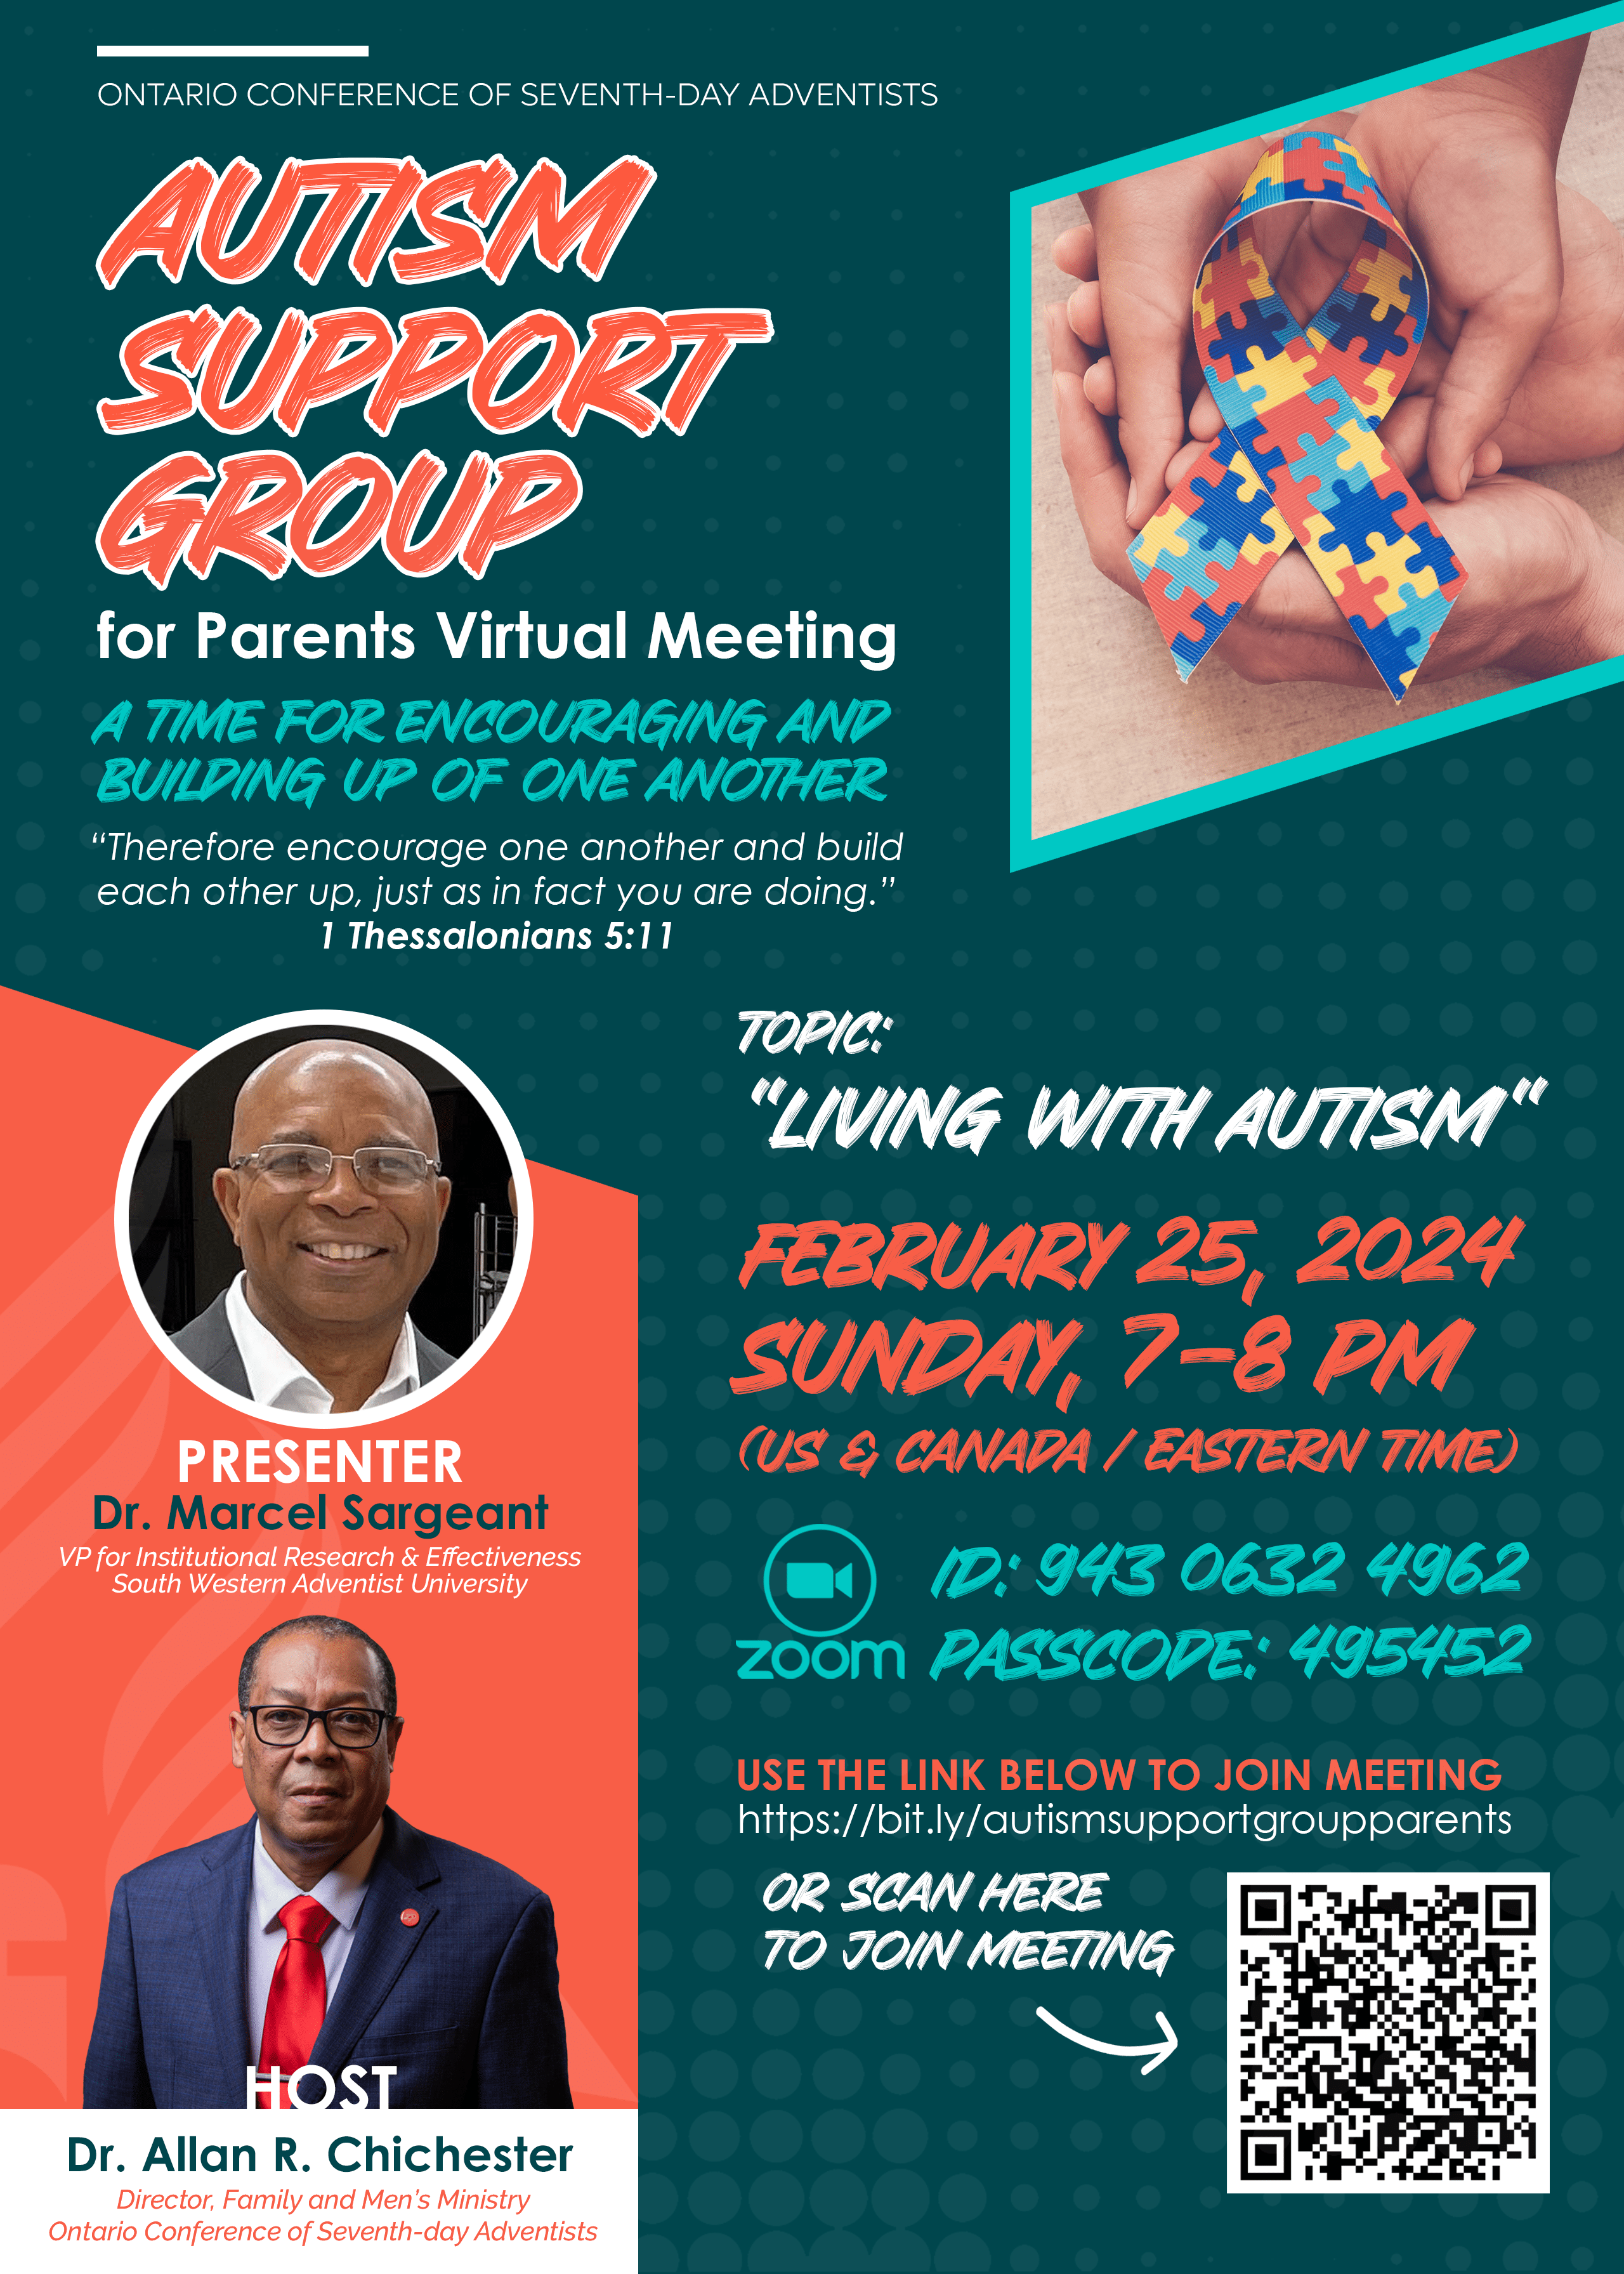 Autism Support Group for Parents Virtual Meeting - February